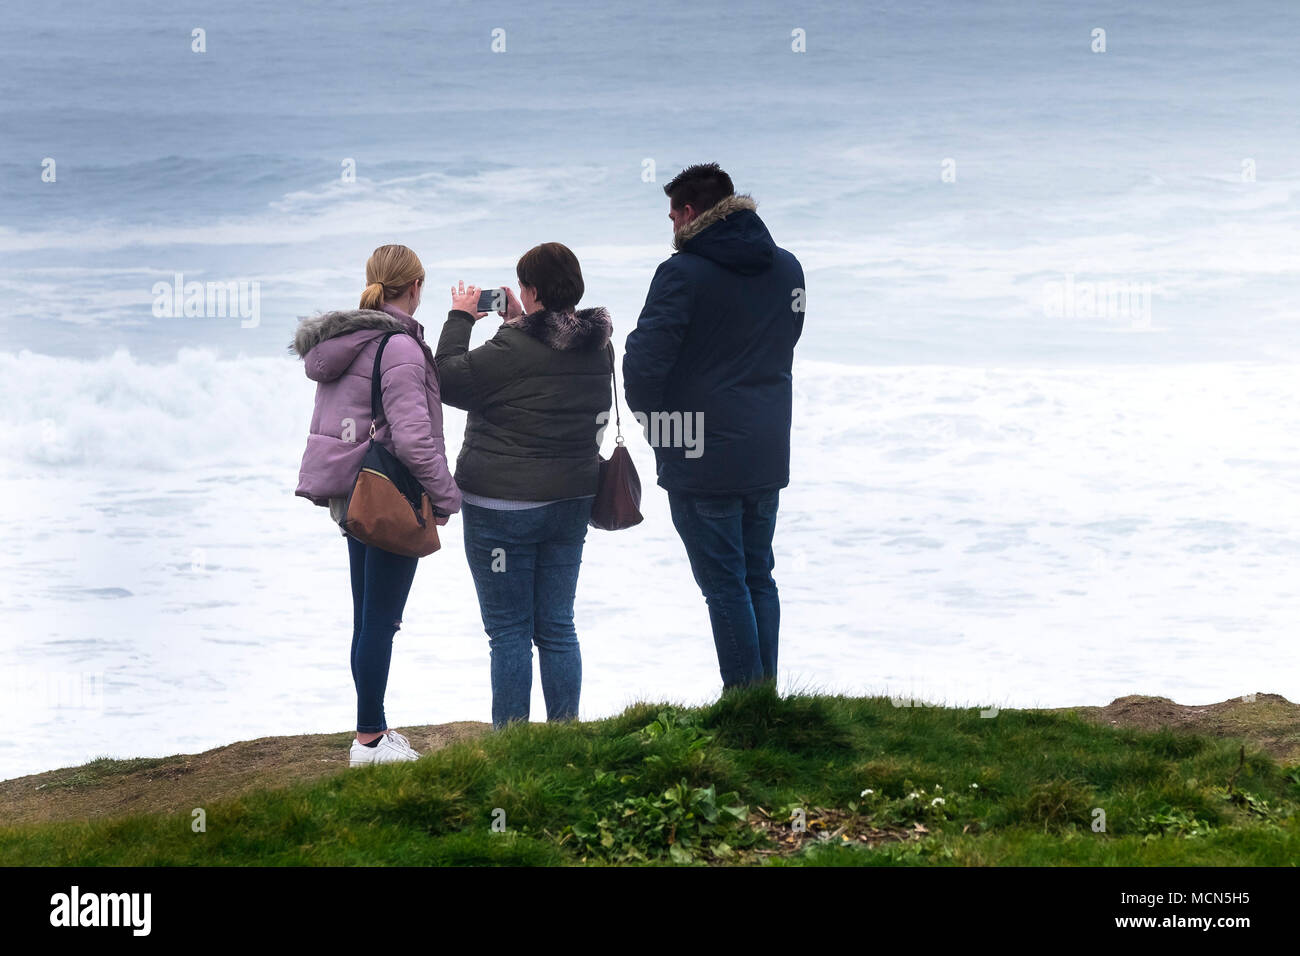 UK weather - holidaymakers enjoying the misty weather conditions on the North Cornwall coast. Stock Photo